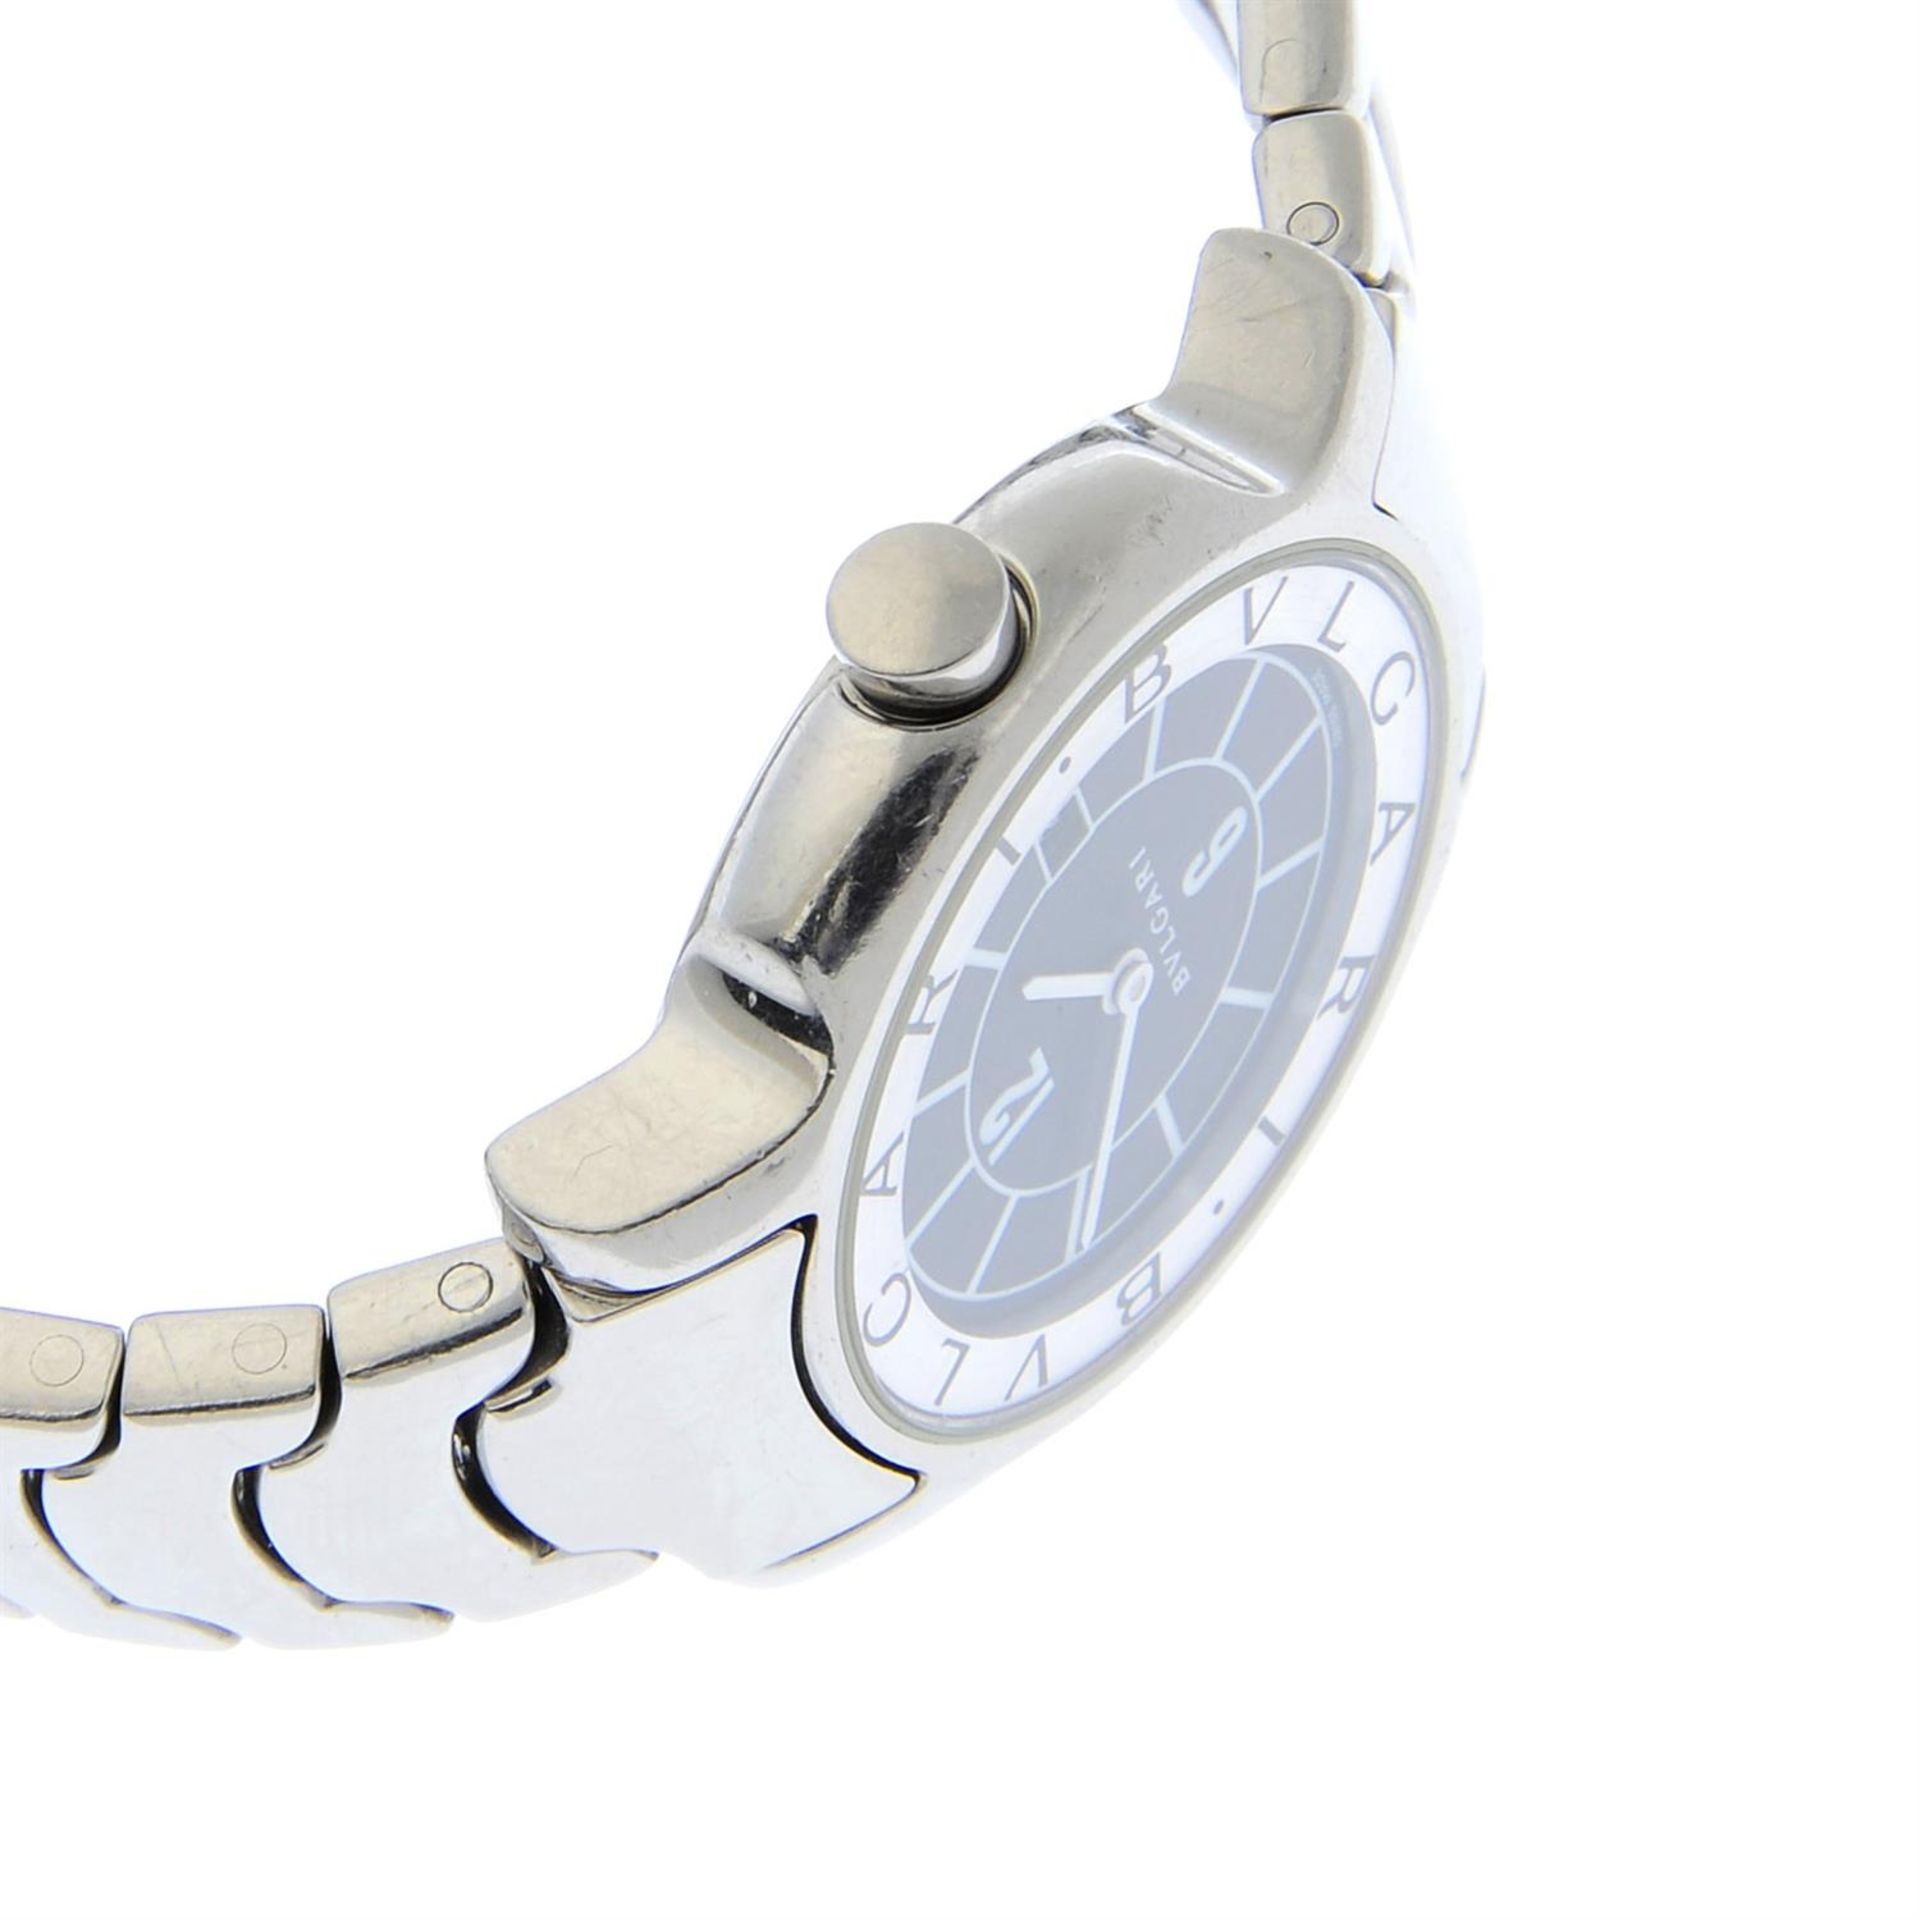 BULGARI - a stainless steel Solotempo bracelet watch, 29mm. - Image 3 of 4